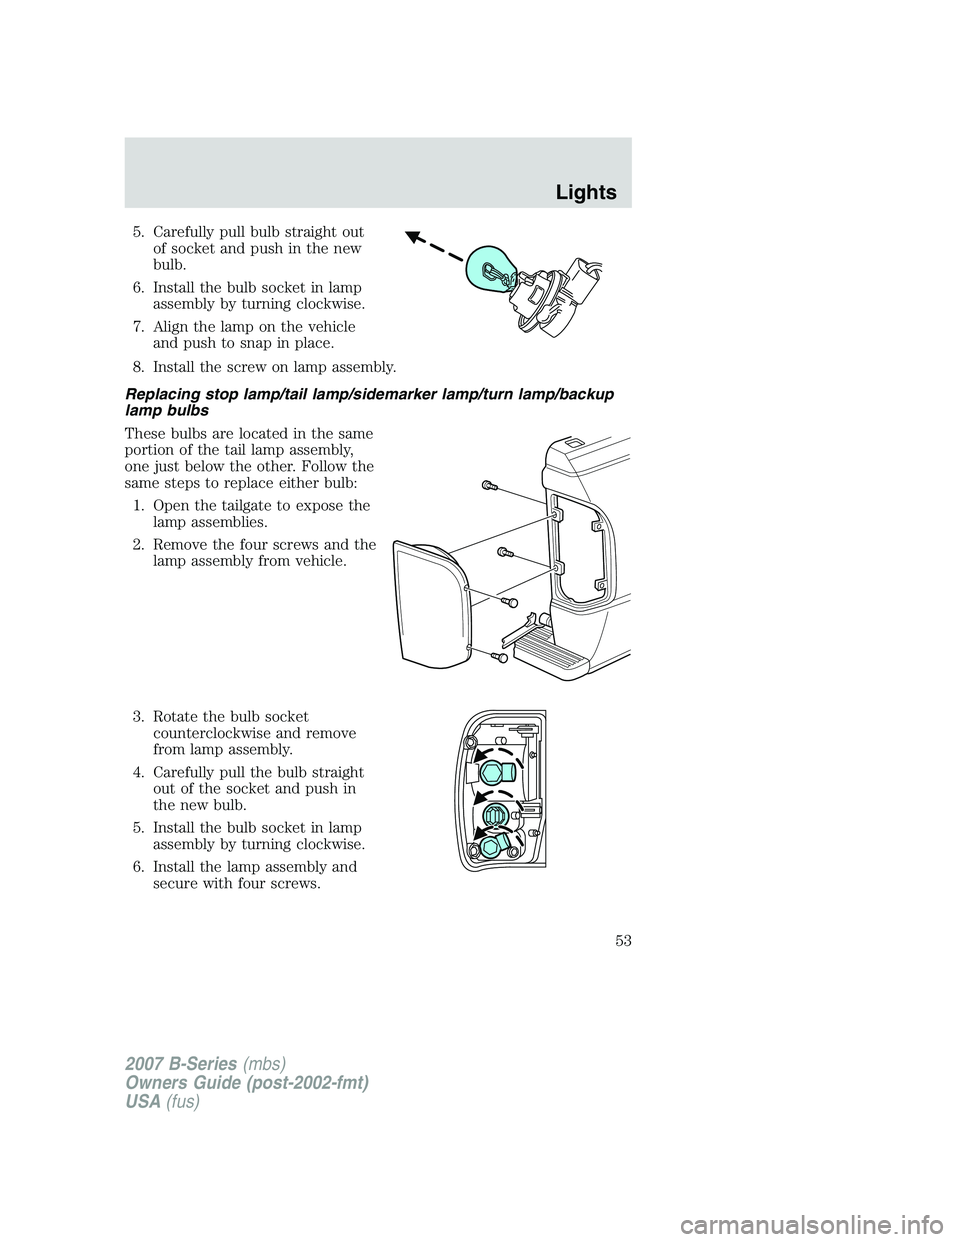 MAZDA MODEL B3000 TRUCK 2007  Owners Manual 5. Carefully pull bulb straight outof socket and push in the new
bulb.
6. Install the bulb socket in lamp assembly by turning clockwise.
7. Align the lamp on the vehicle and push to snap in place.
8. 